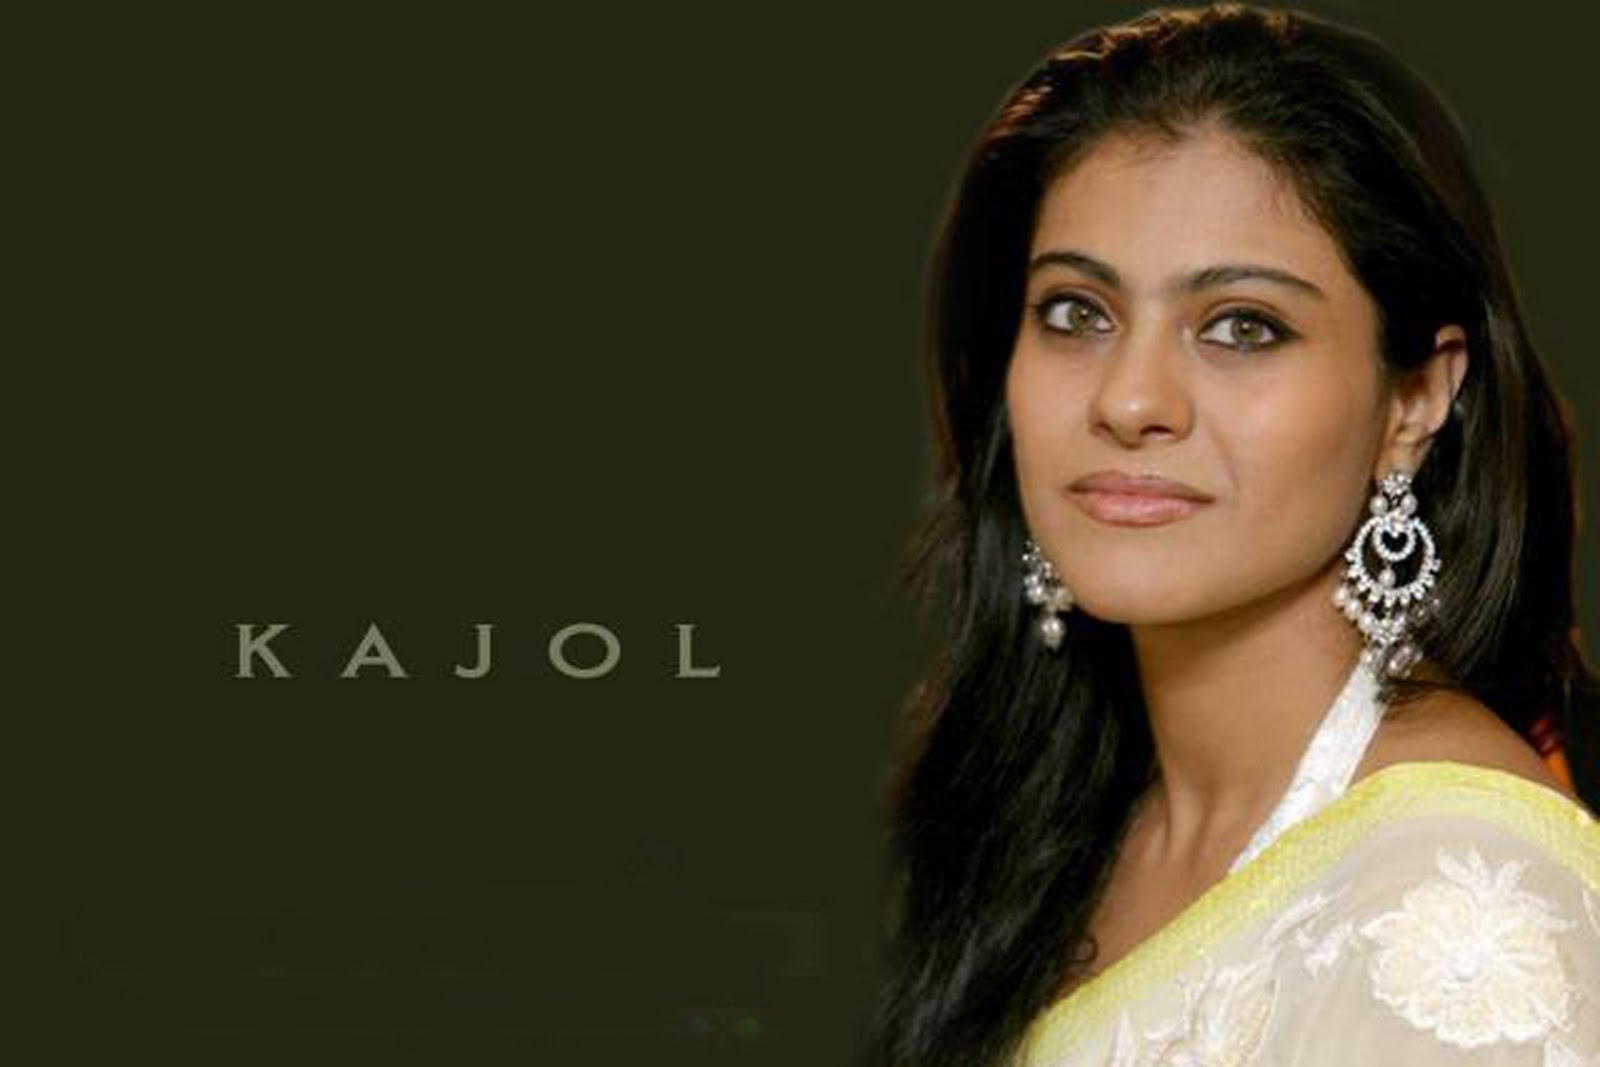 1600px x 1067px - Free download Kajol Bollywood Actress Hot Wallpapers Latest Celebrity  Photos [1600x1067] for your Desktop, Mobile & Tablet | Explore 46+  Hotwallpaper in | Hot Rod Wallpaper, Hot Pink Apple Wallpaper, Free Fantasy  Wallpaper Hot